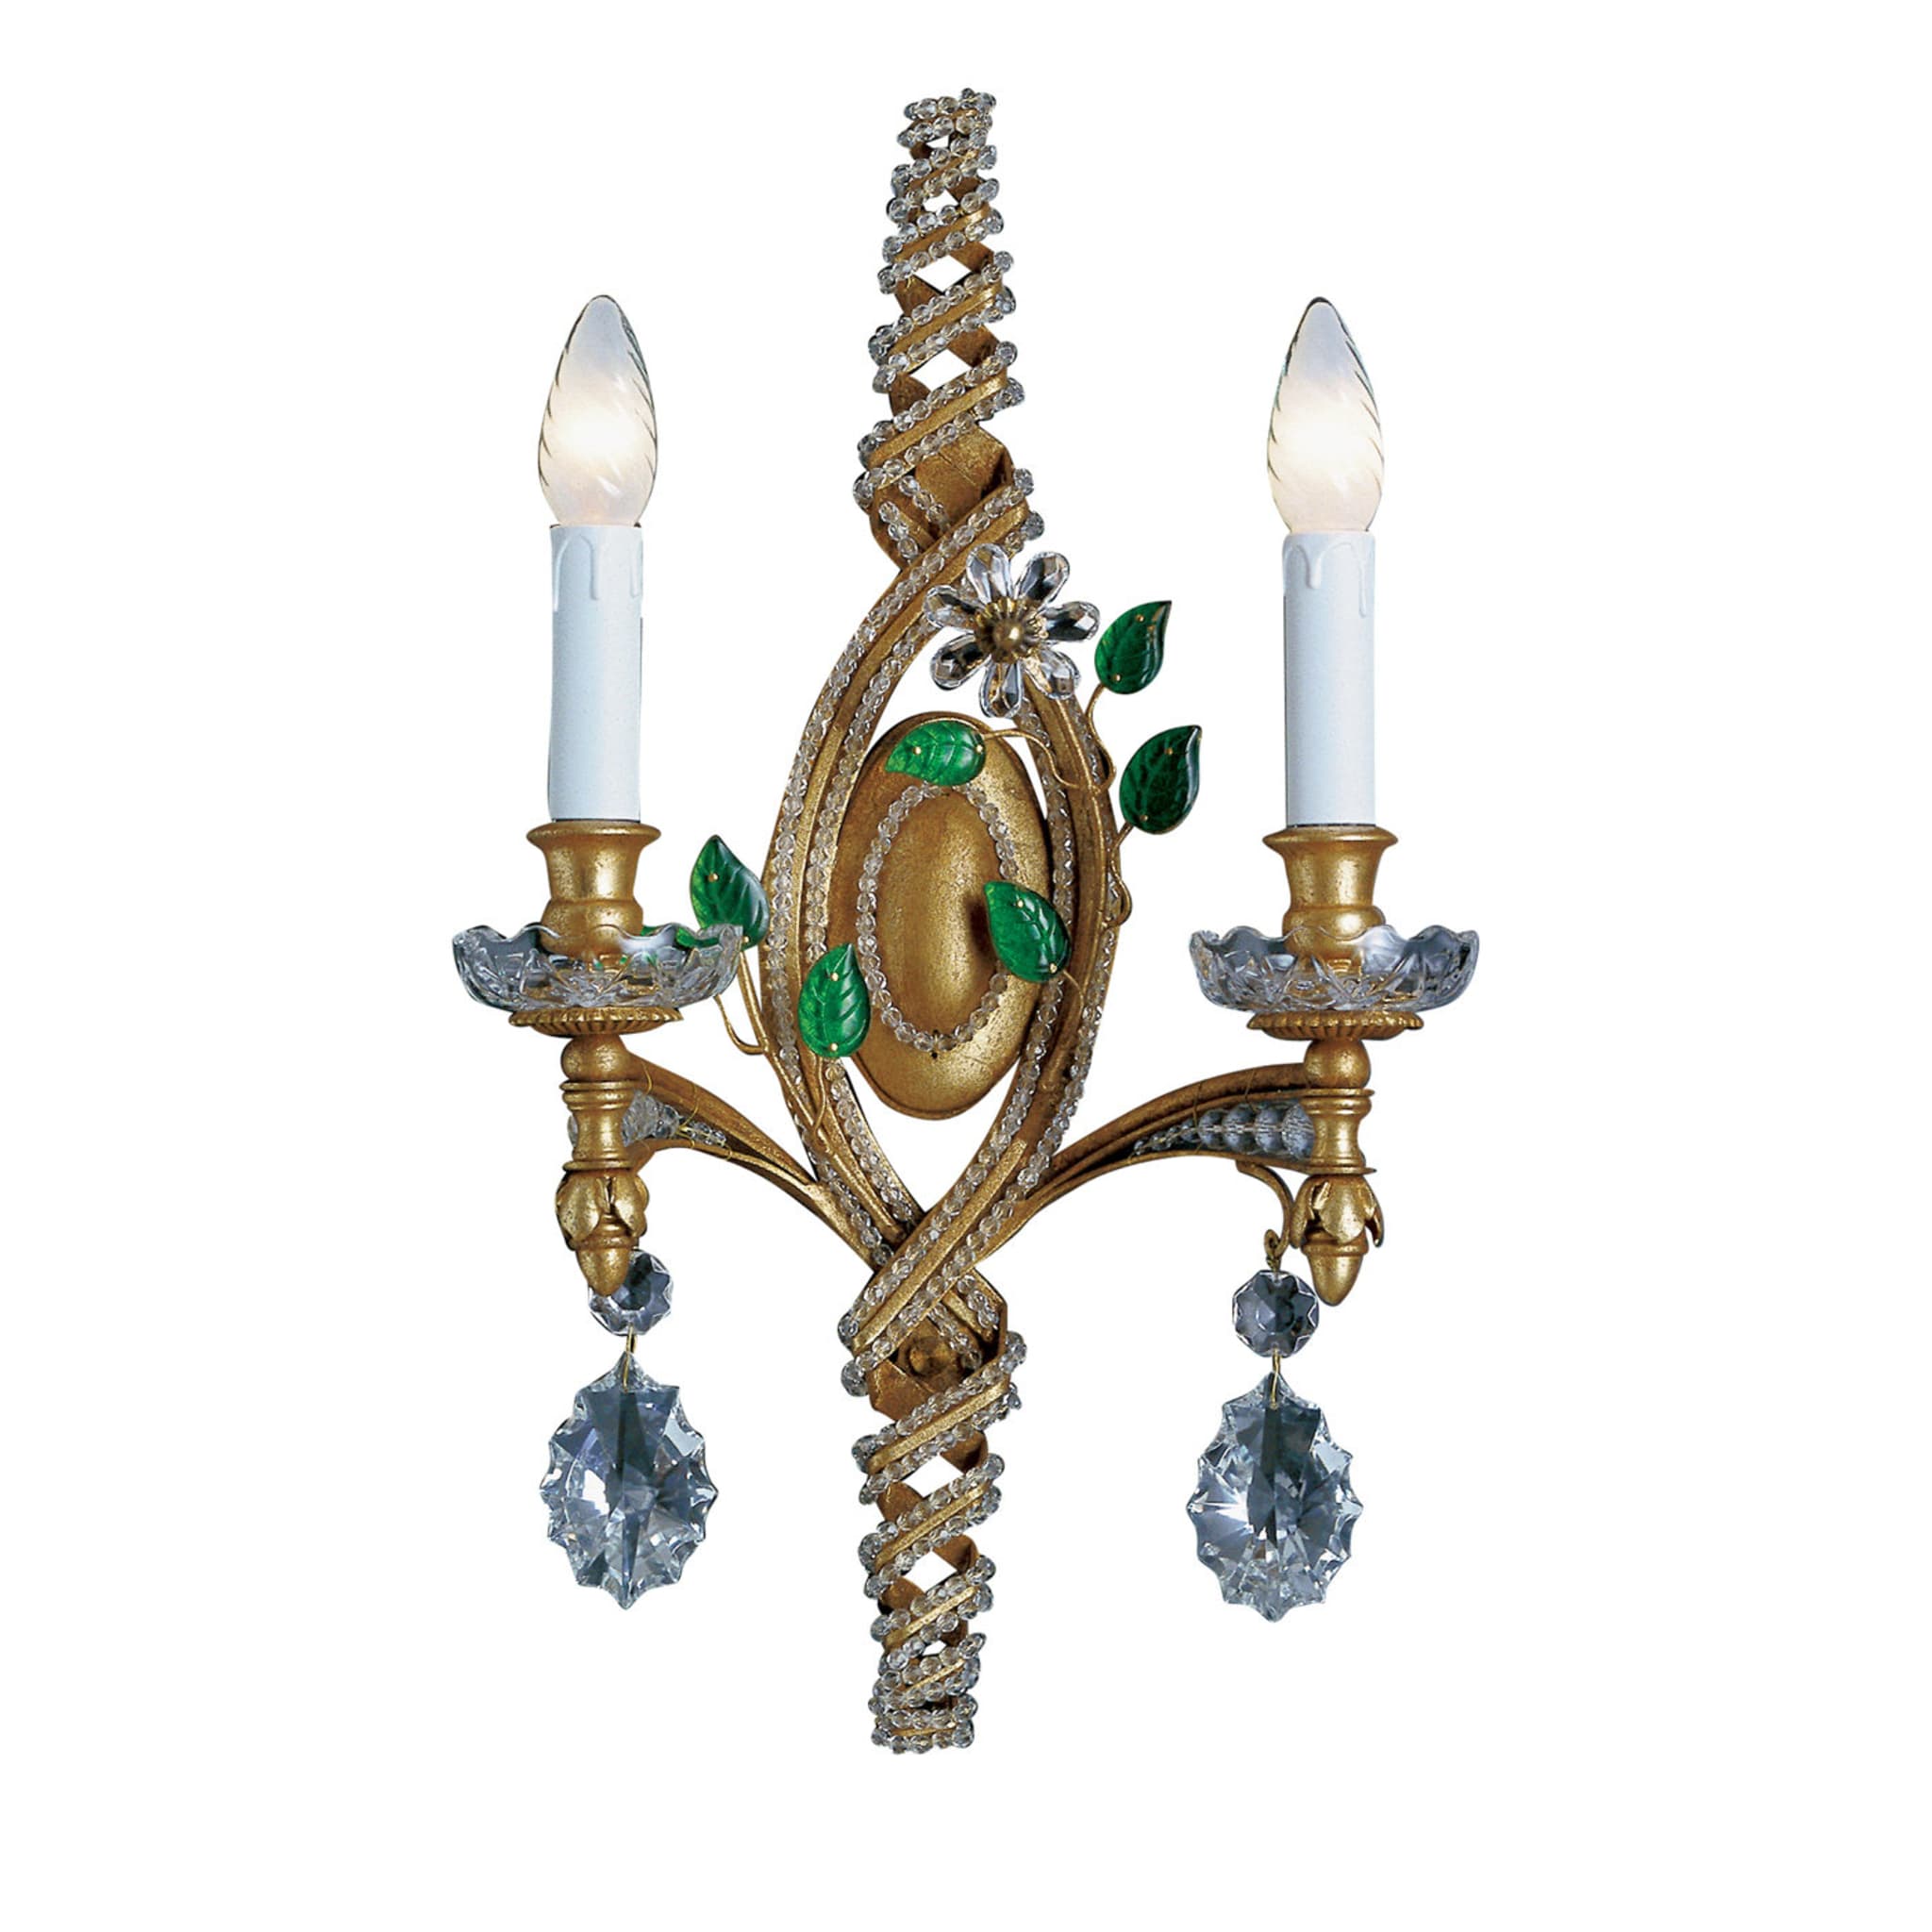 2-Light Wall Sconce - Main view